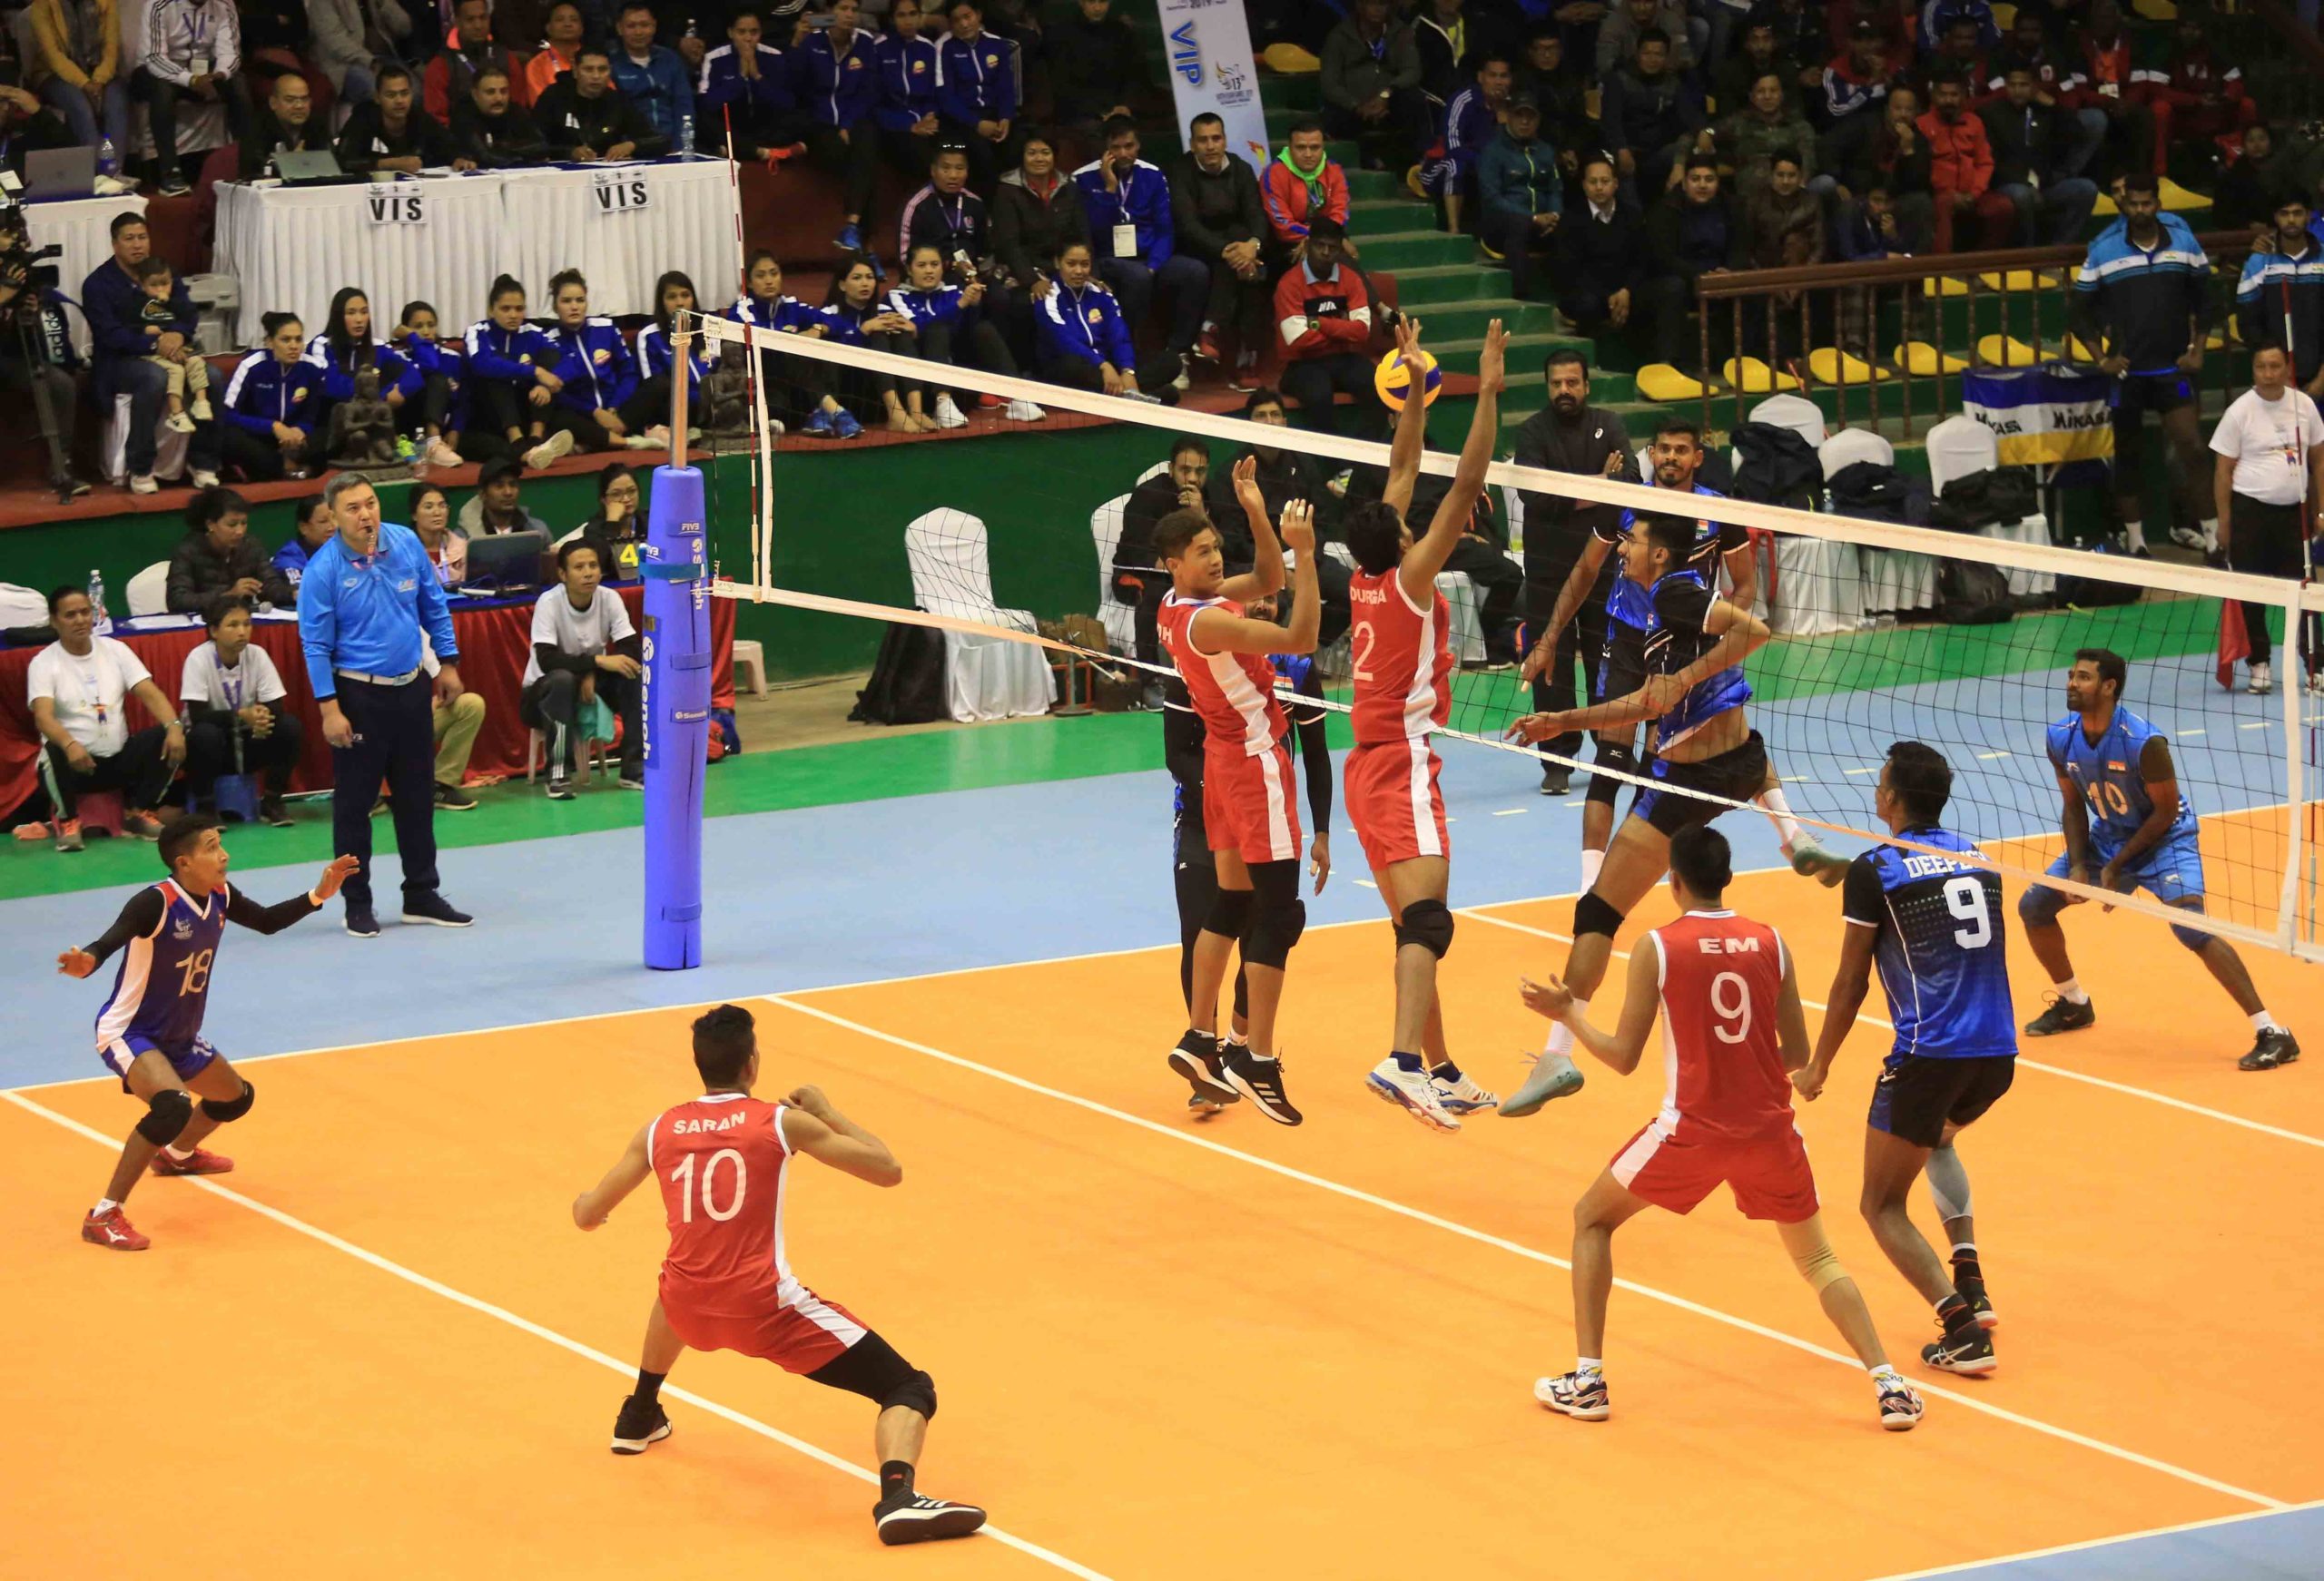 INDIAN MEN’S AND WOMEN’S VOLLEYBALL TEAMS THROUGH TO SEMI-FINALS OF 13TH SOUTH ASIAN GAMES